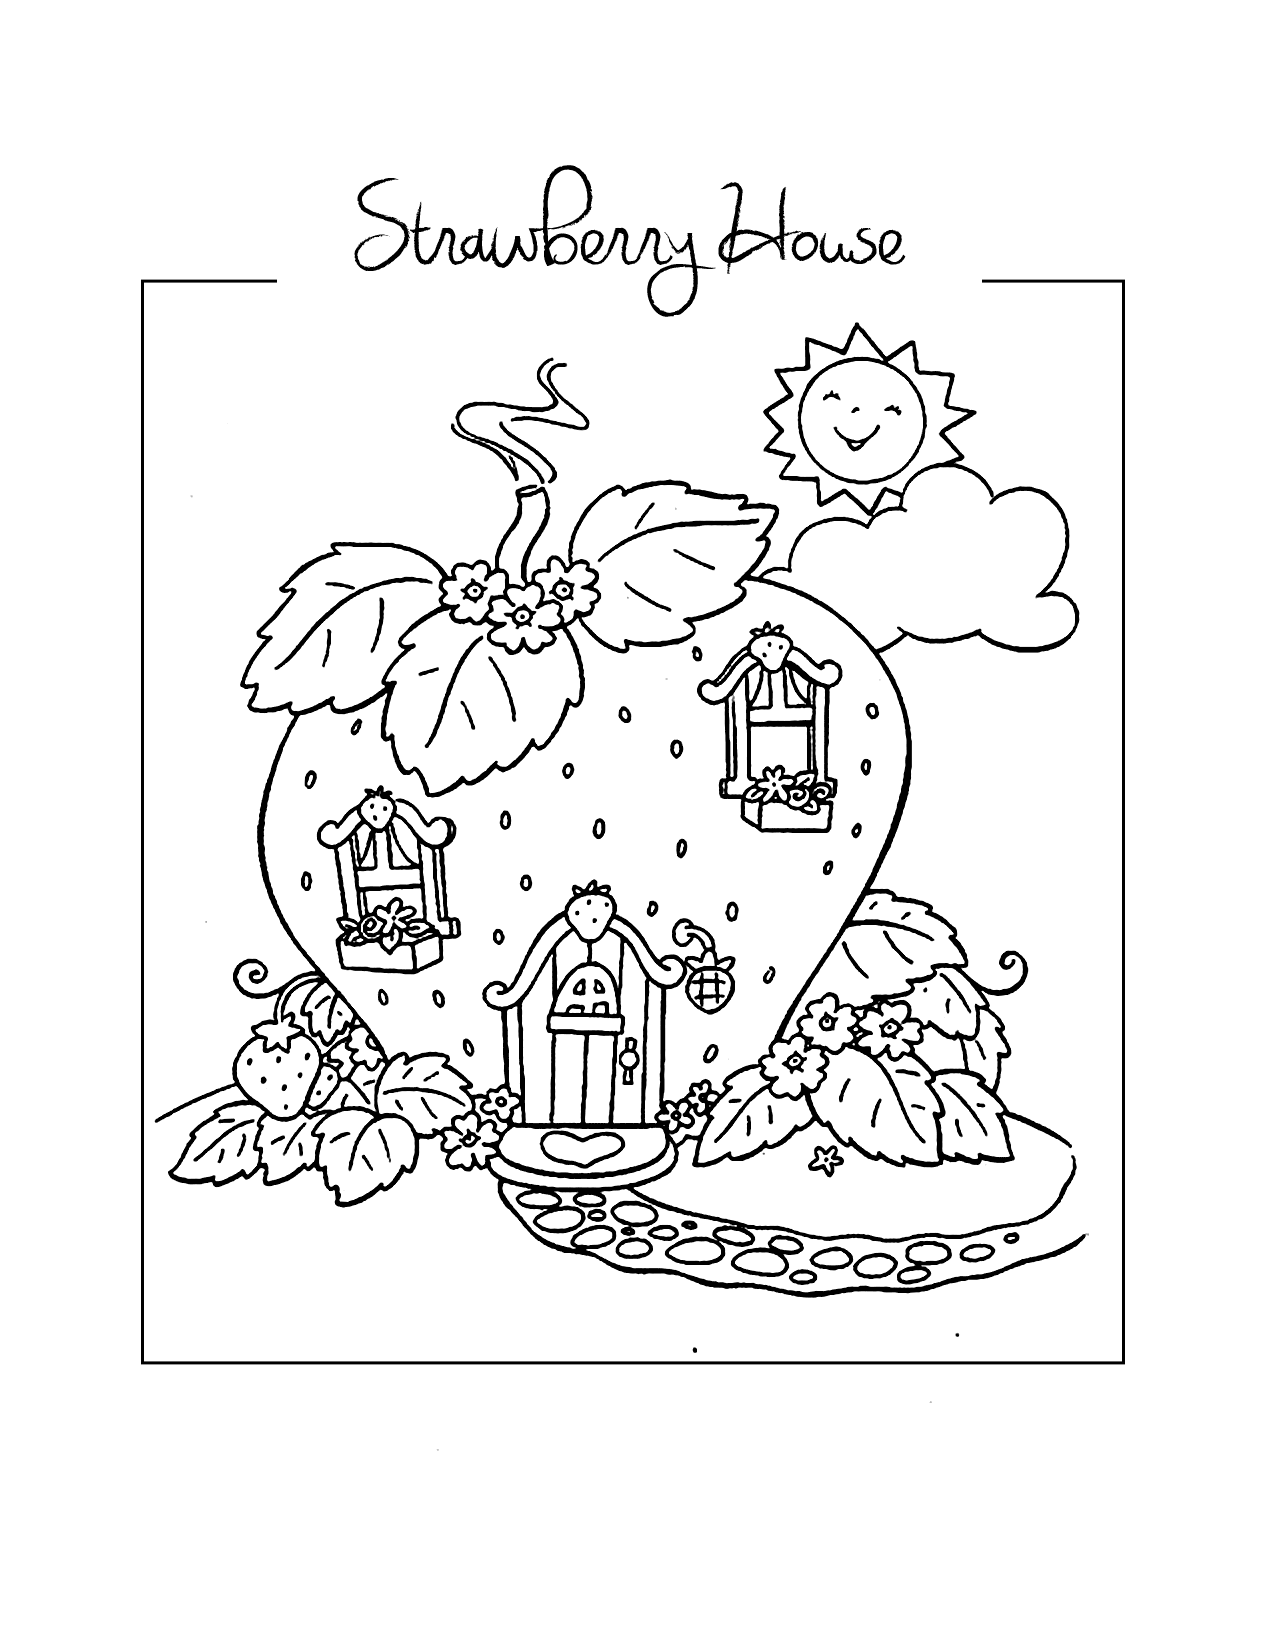 Adorable Strawberry House Coloring Page